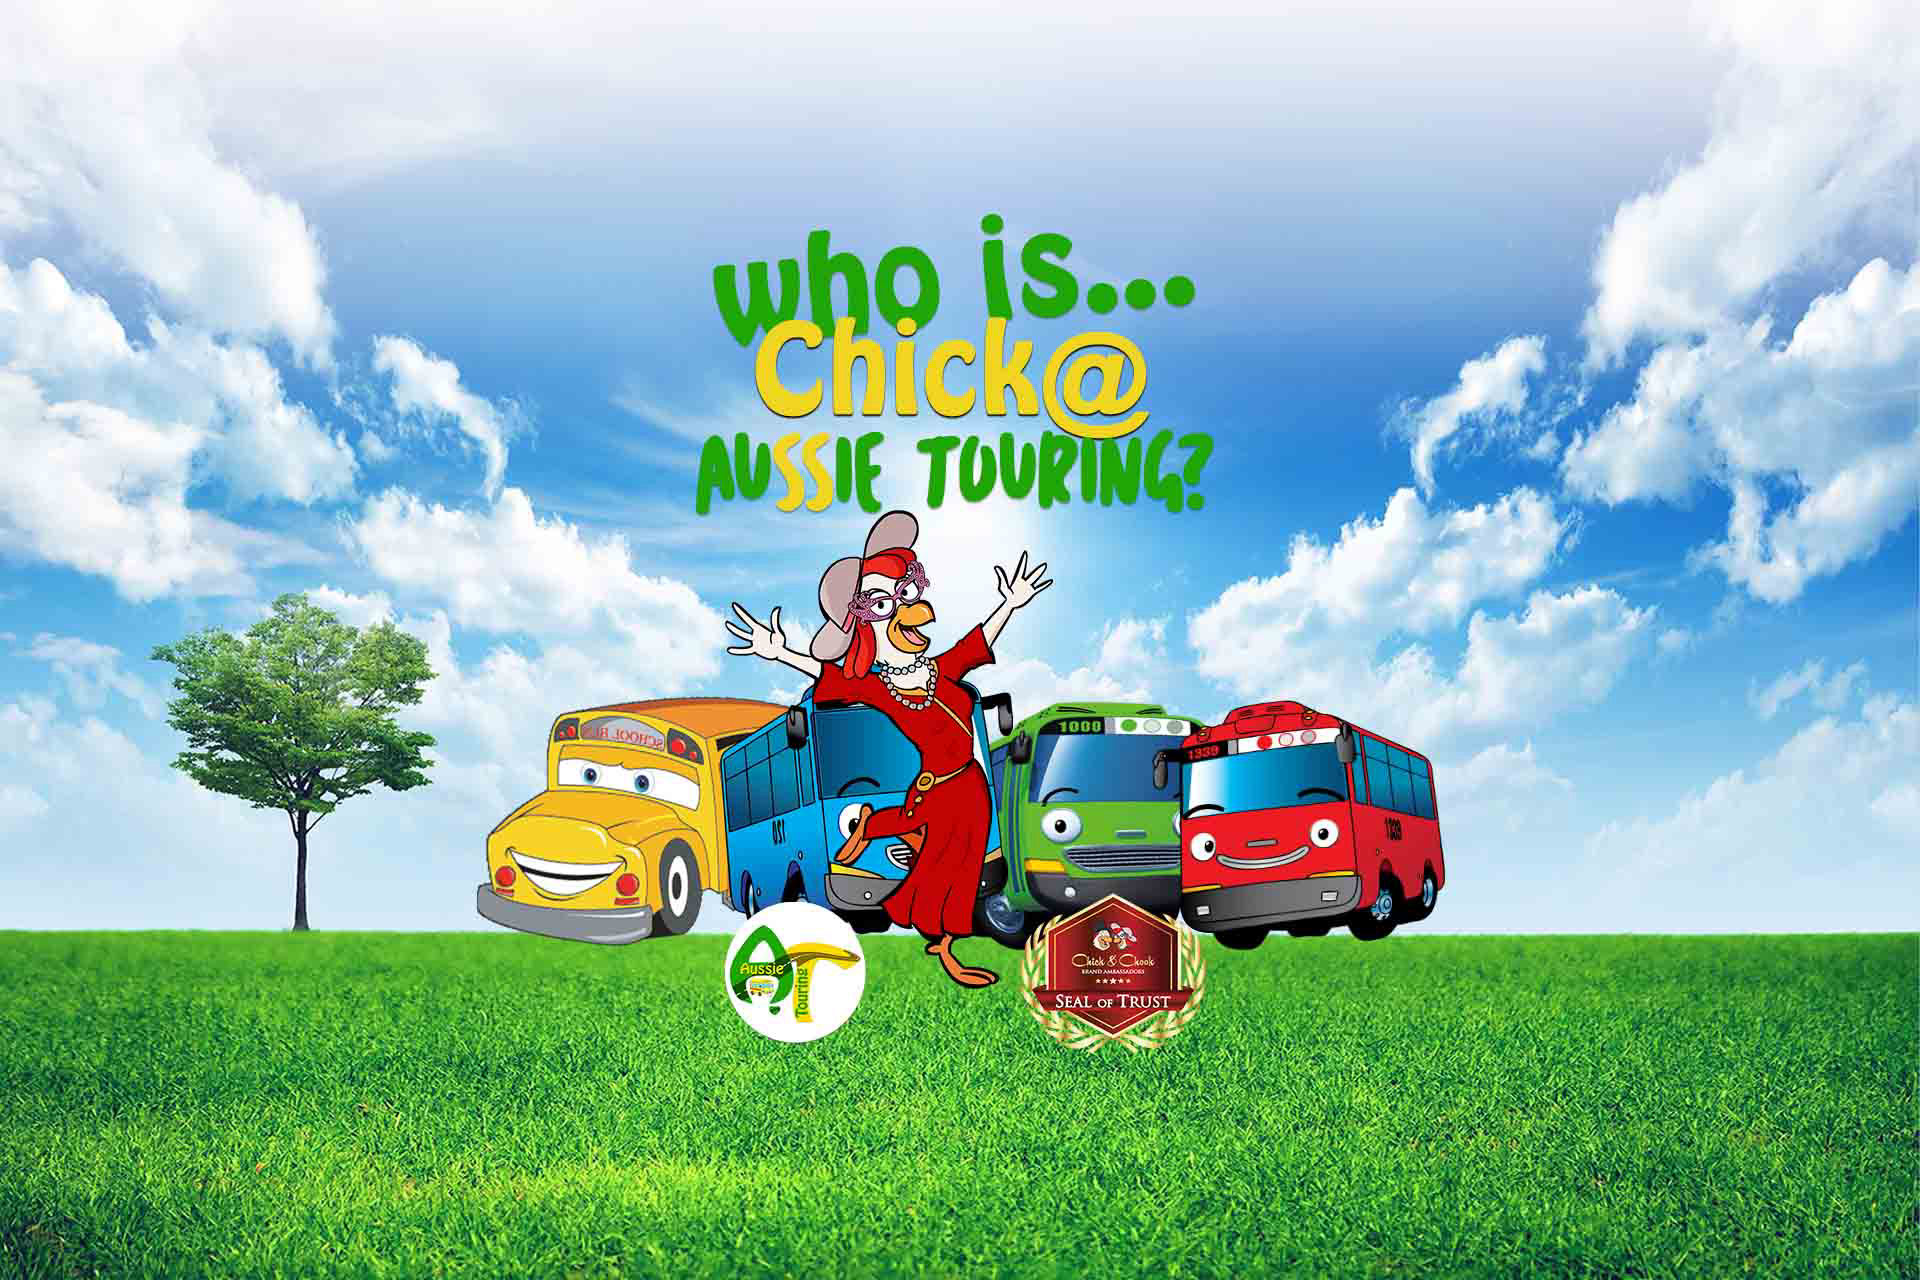 Who Is Chick at Cooee Tours, She's a Brand Ambassador with integrity and style, Cheap Day Tours, 2 and 3 day tours, inexpensive day tours with reliable company, Cooee Tours Australia Bus Tour Company with Mercedes Benz Buses for Winery Tours, Nature Tours, City Tours, Fun Tours, Golf Tours, Queensland, Brisbane, Toowoomba, Gold Coast, Sunshine Coast, Cairns, Wide Bay, Bryon Bay, Sydney, Noosa Heads, golfing tours that include kids